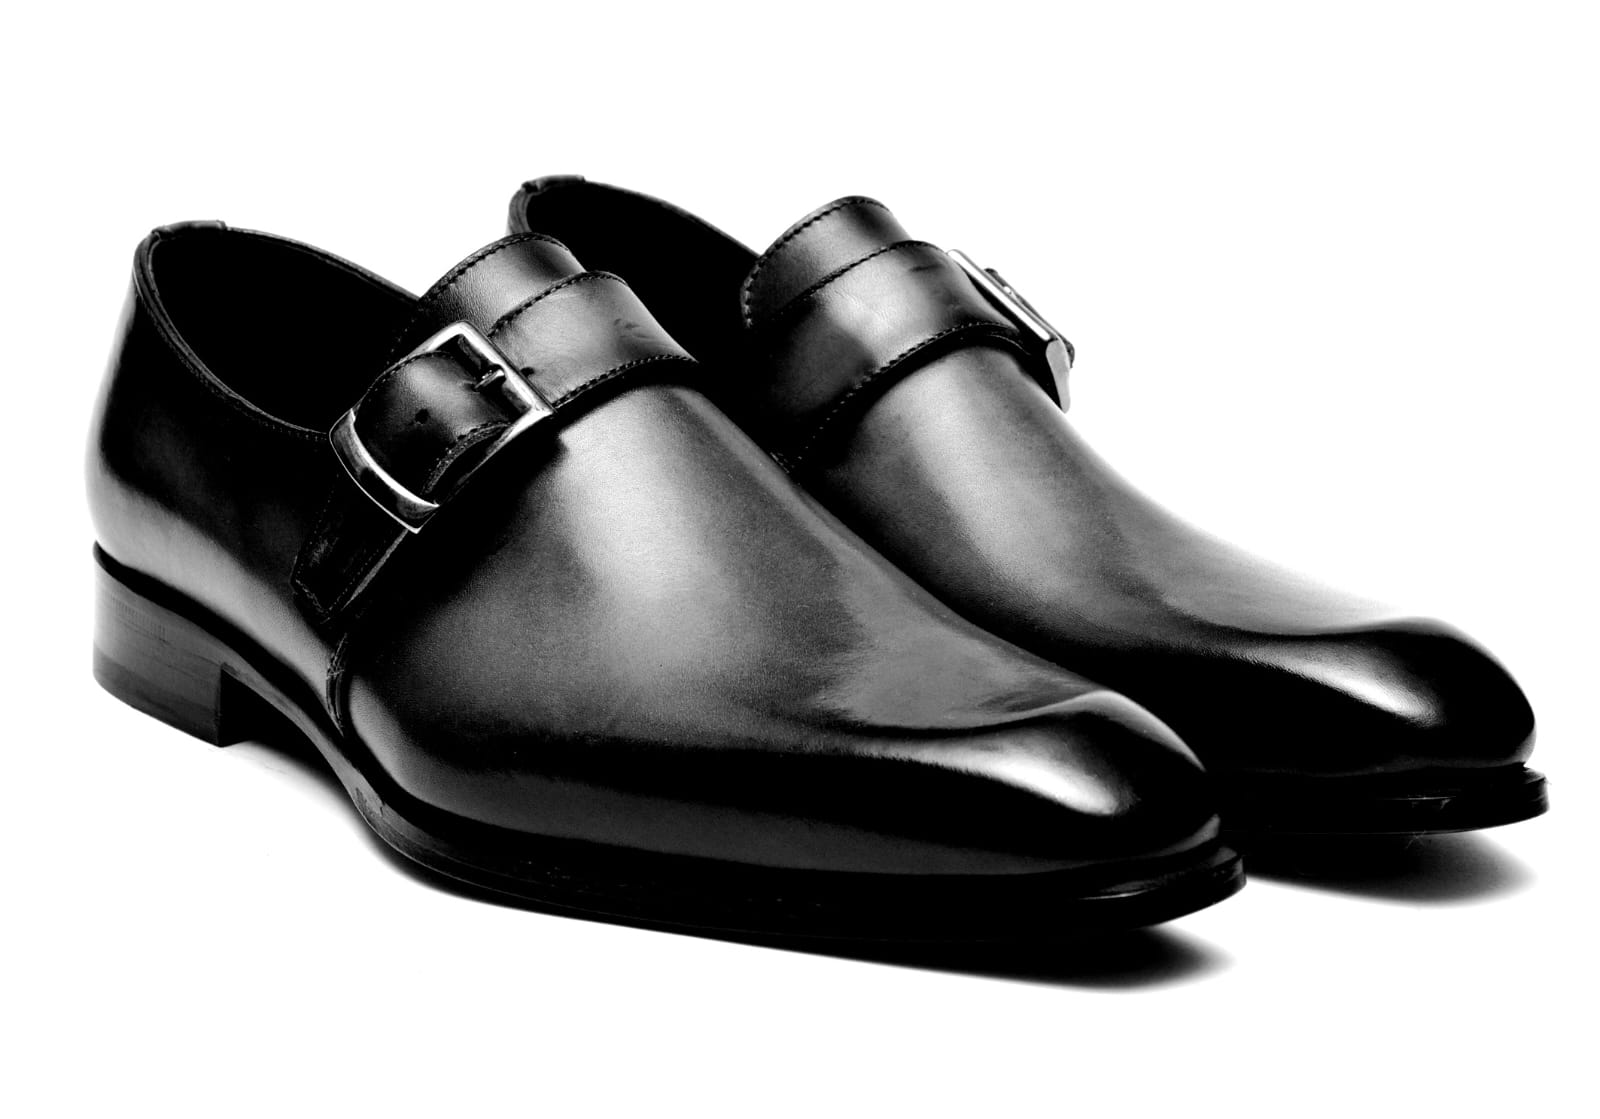 Filangieri - Black Oxford Leather Dress Shoes with Monk Strap 